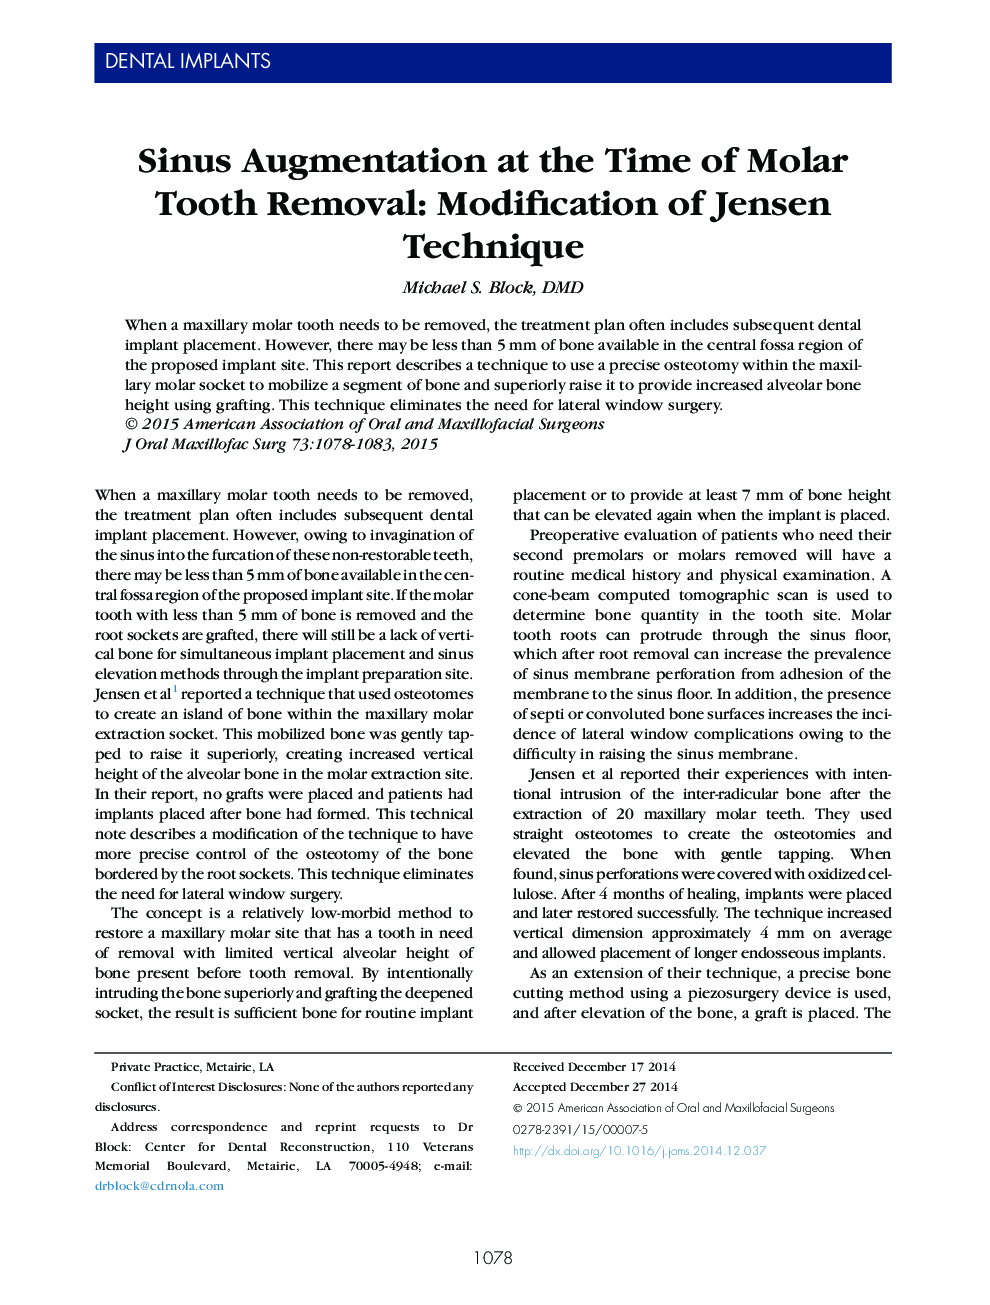 Sinus Augmentation at the Time of Molar Tooth Removal: Modification of Jensen Technique 